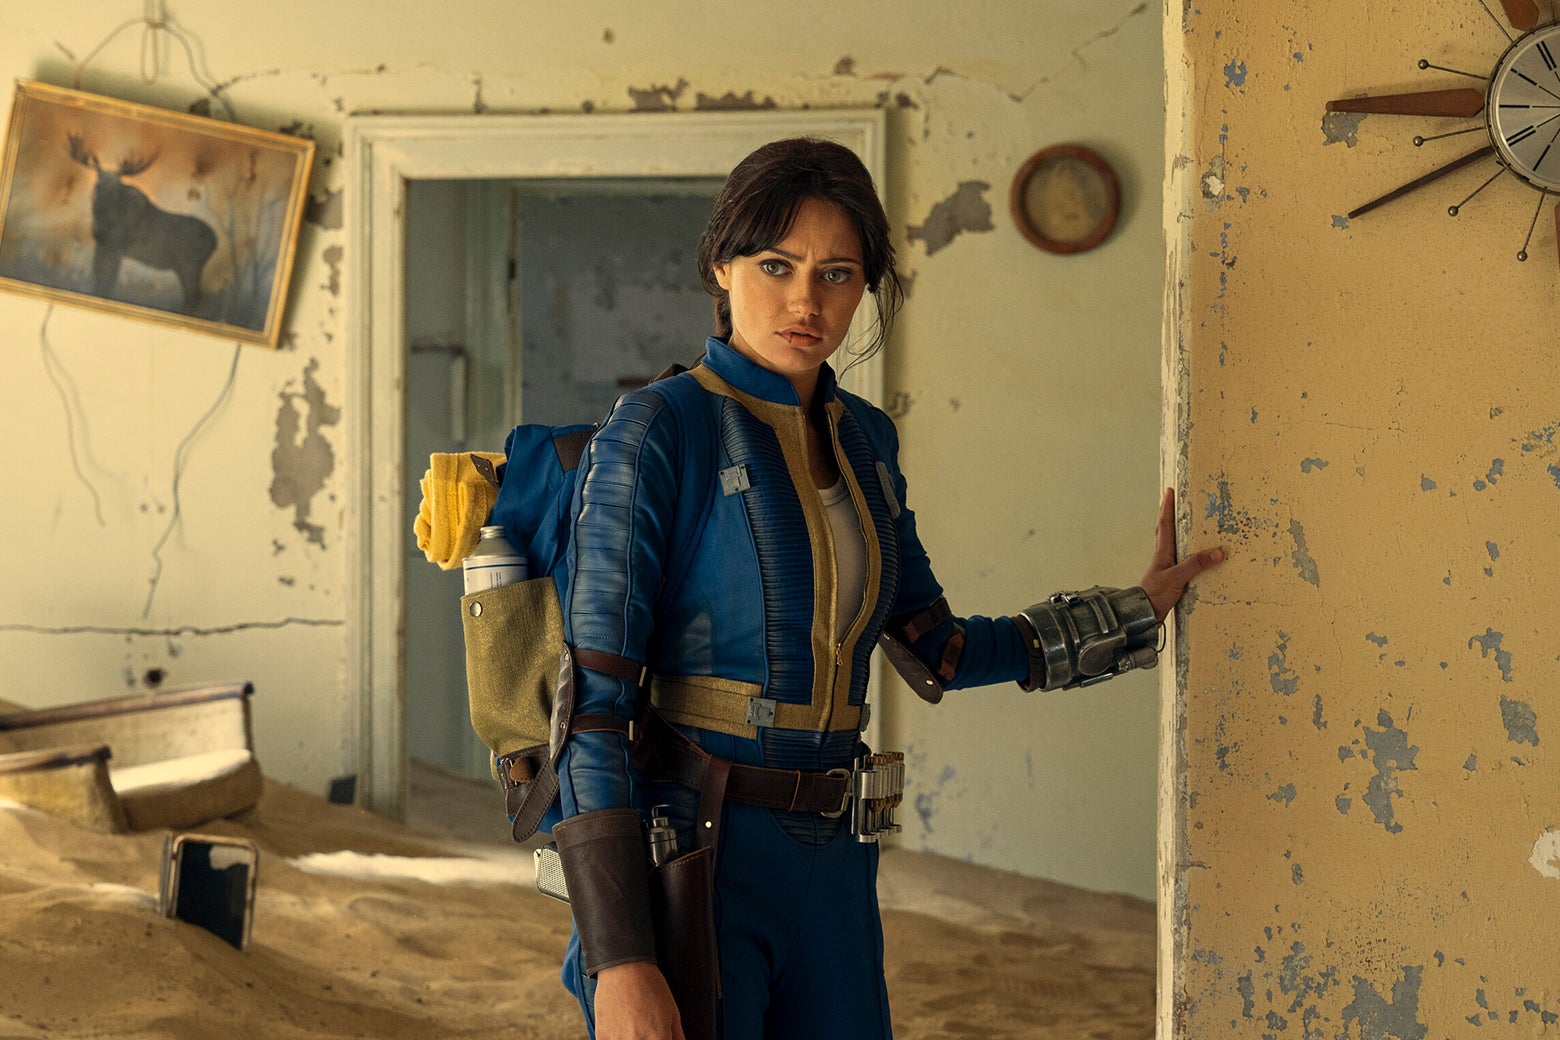 Ella Purnell as Lucy, standing in an abandoned house overtaken by desert.